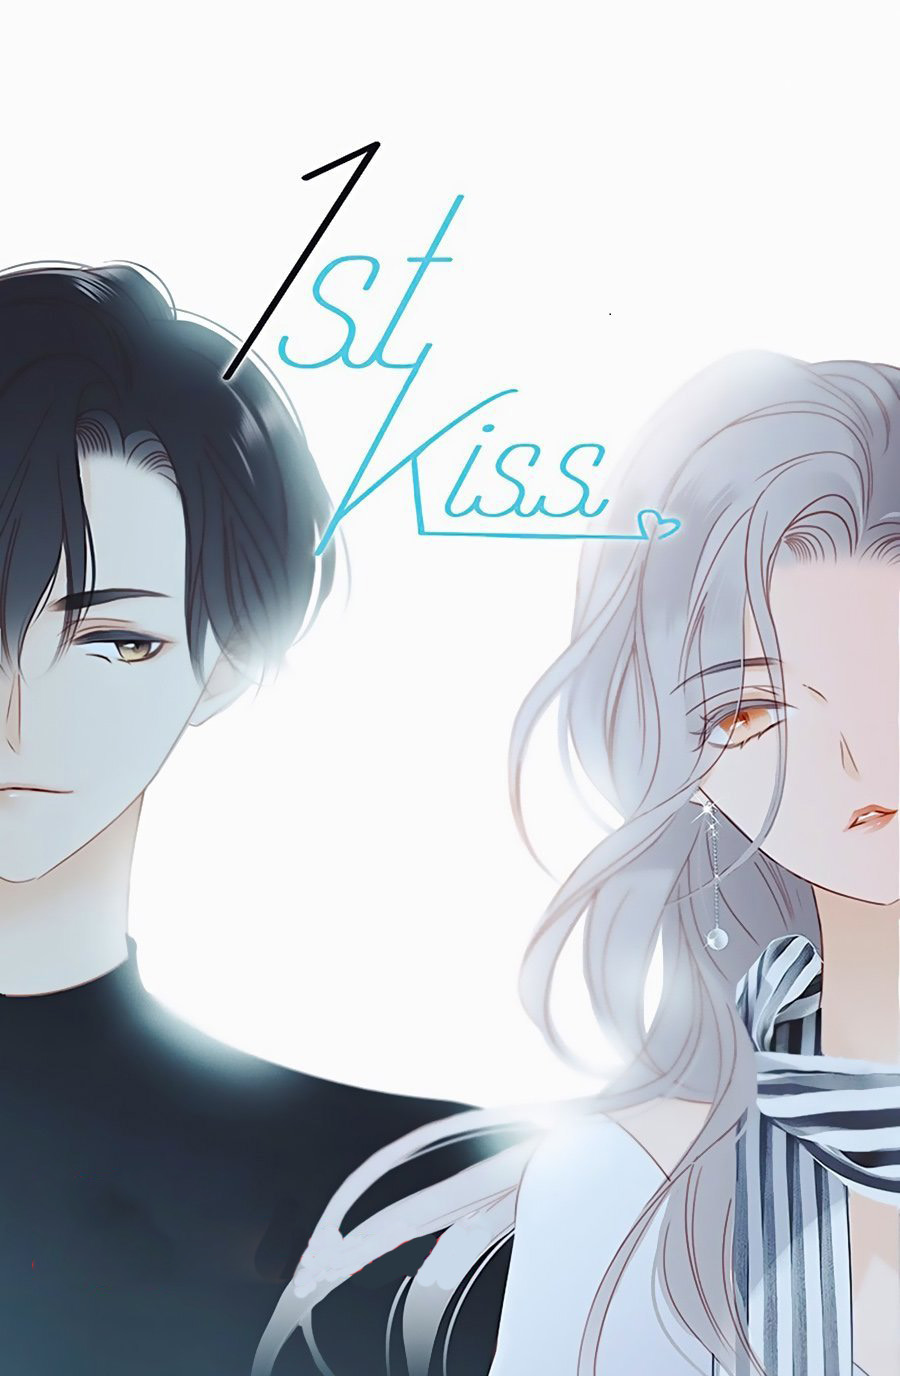 1st Kiss – I don’t want to consider you as sister anymore